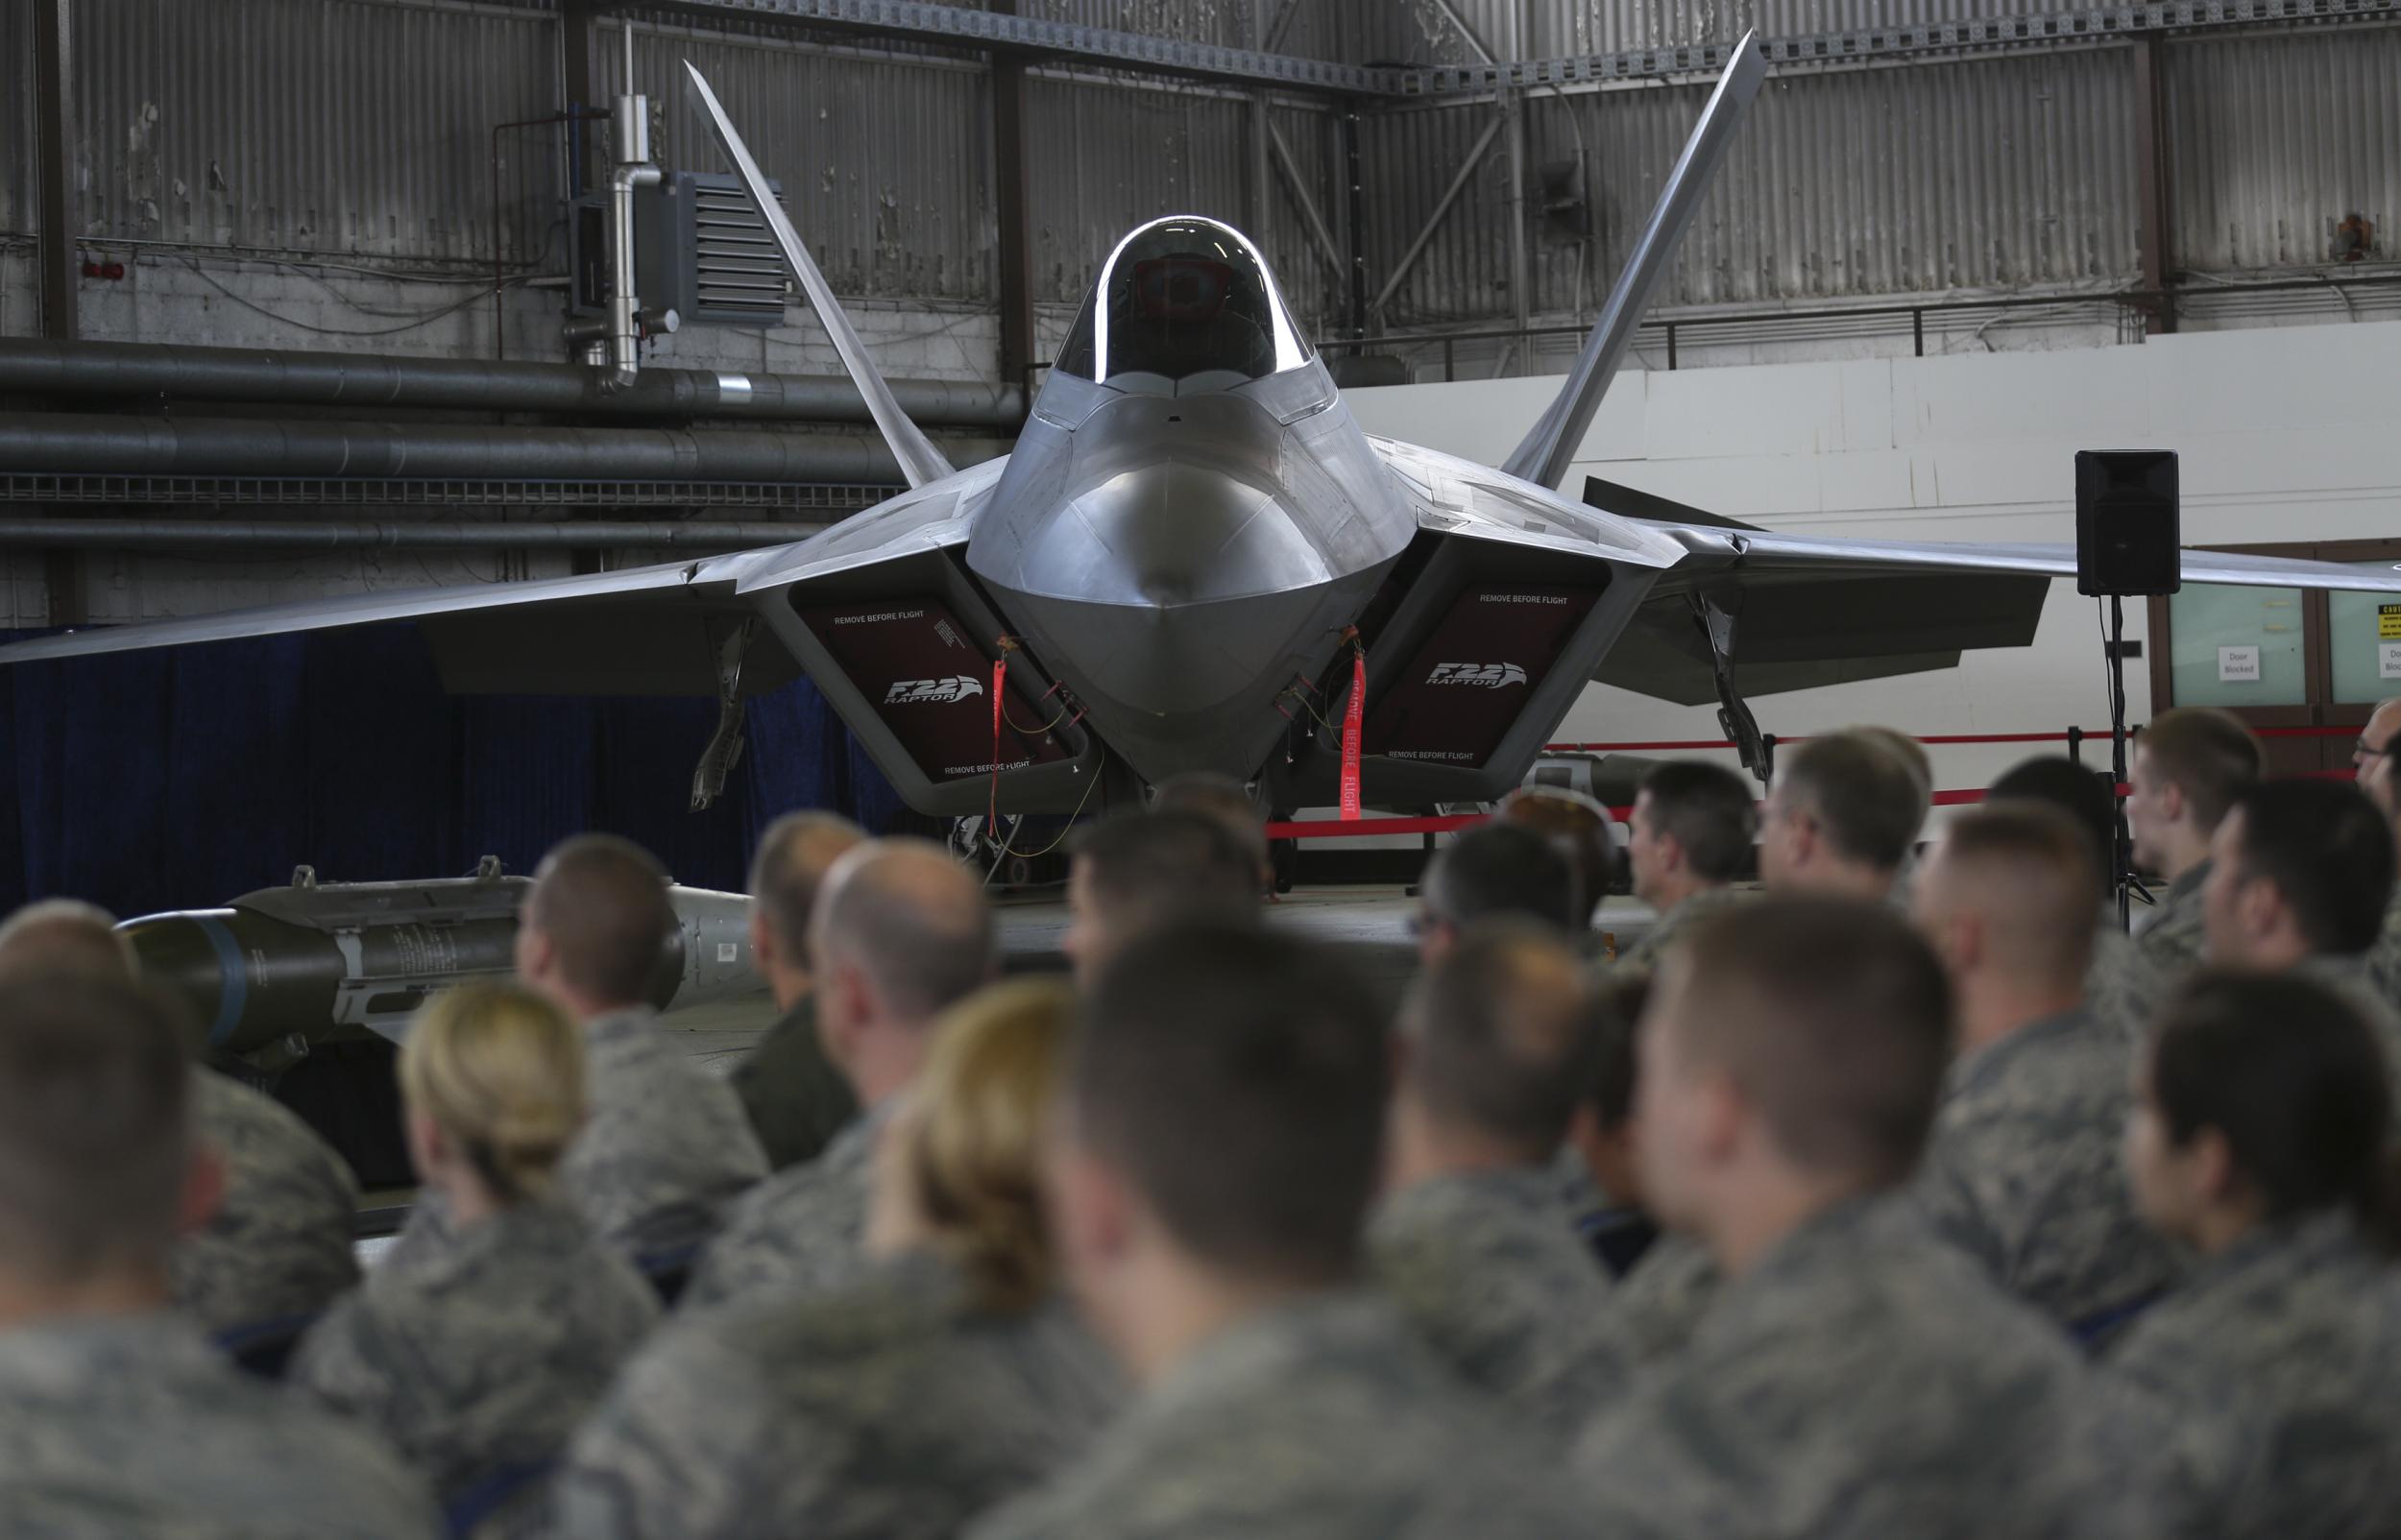 Soldiers listen in front of an U.S. Air Force F-22 Raptor fighter jet during a briefing in a hangar at the U.S. Spangdahlem Air base, Germany